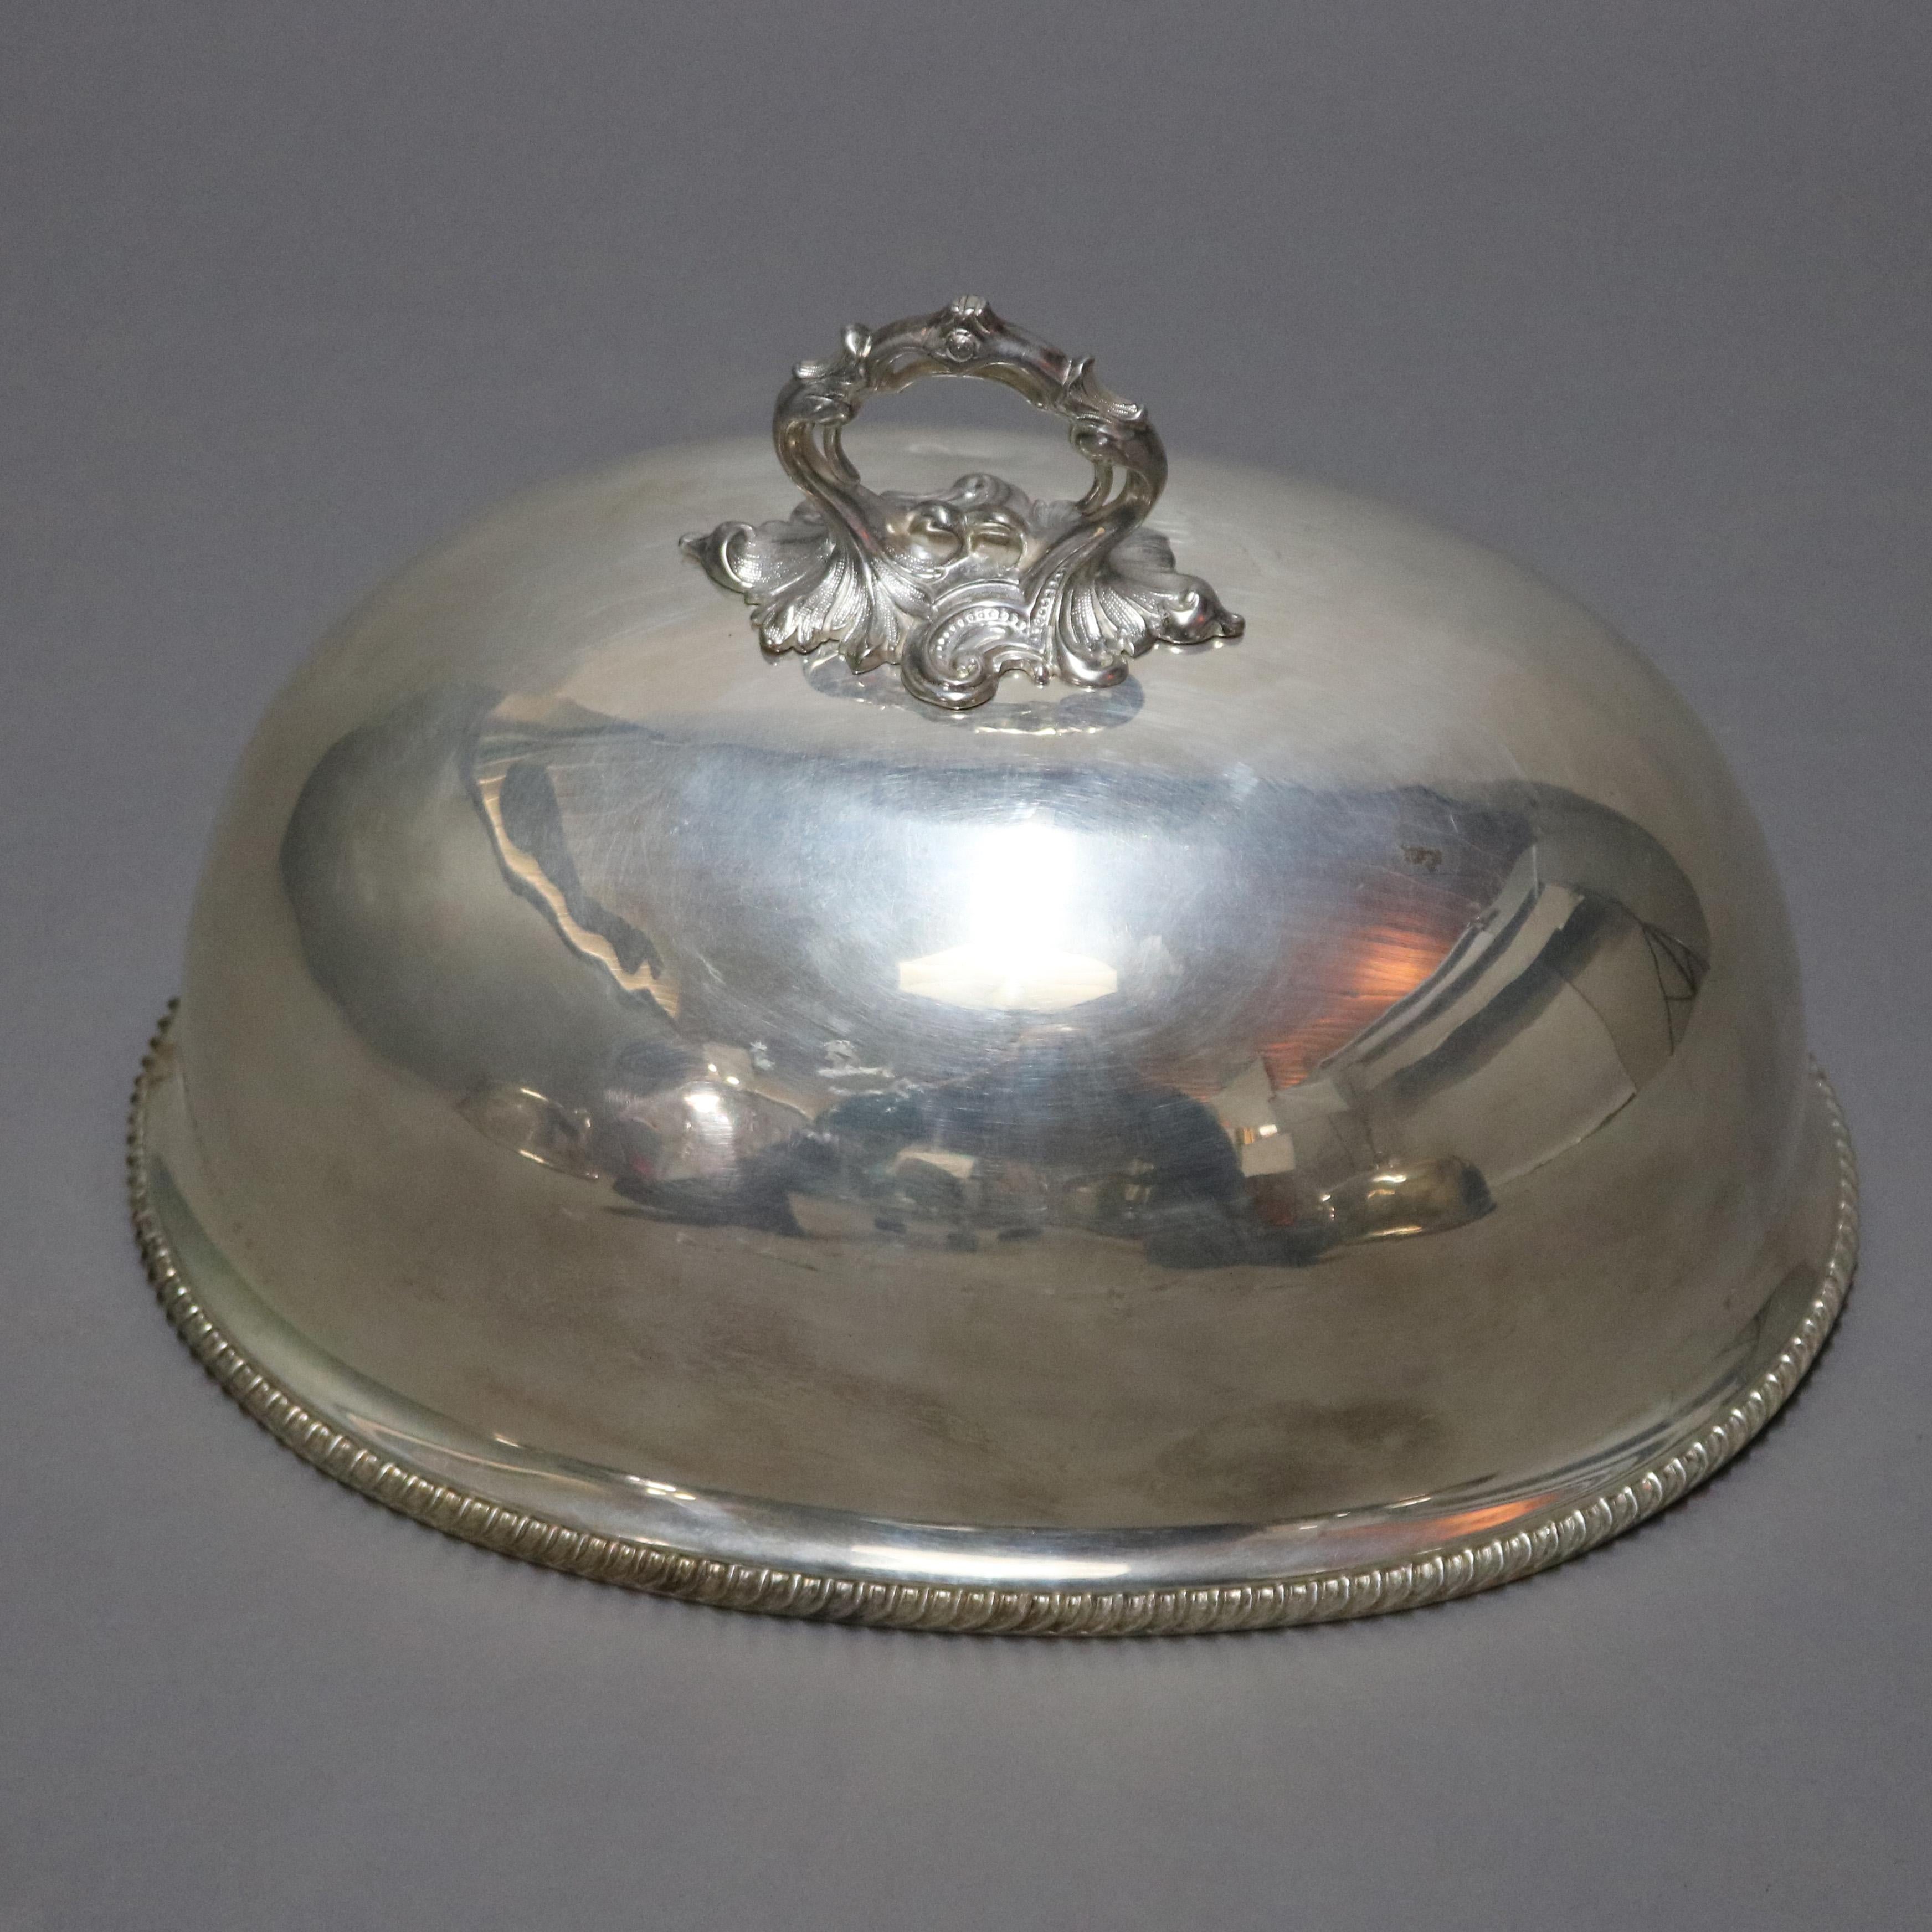 An antique English graduated set of three silver plate Sheffield style cloches, food serving domes, offer foliate form handles and gadrooned trimming, 19th century.

Measures - lg: 11